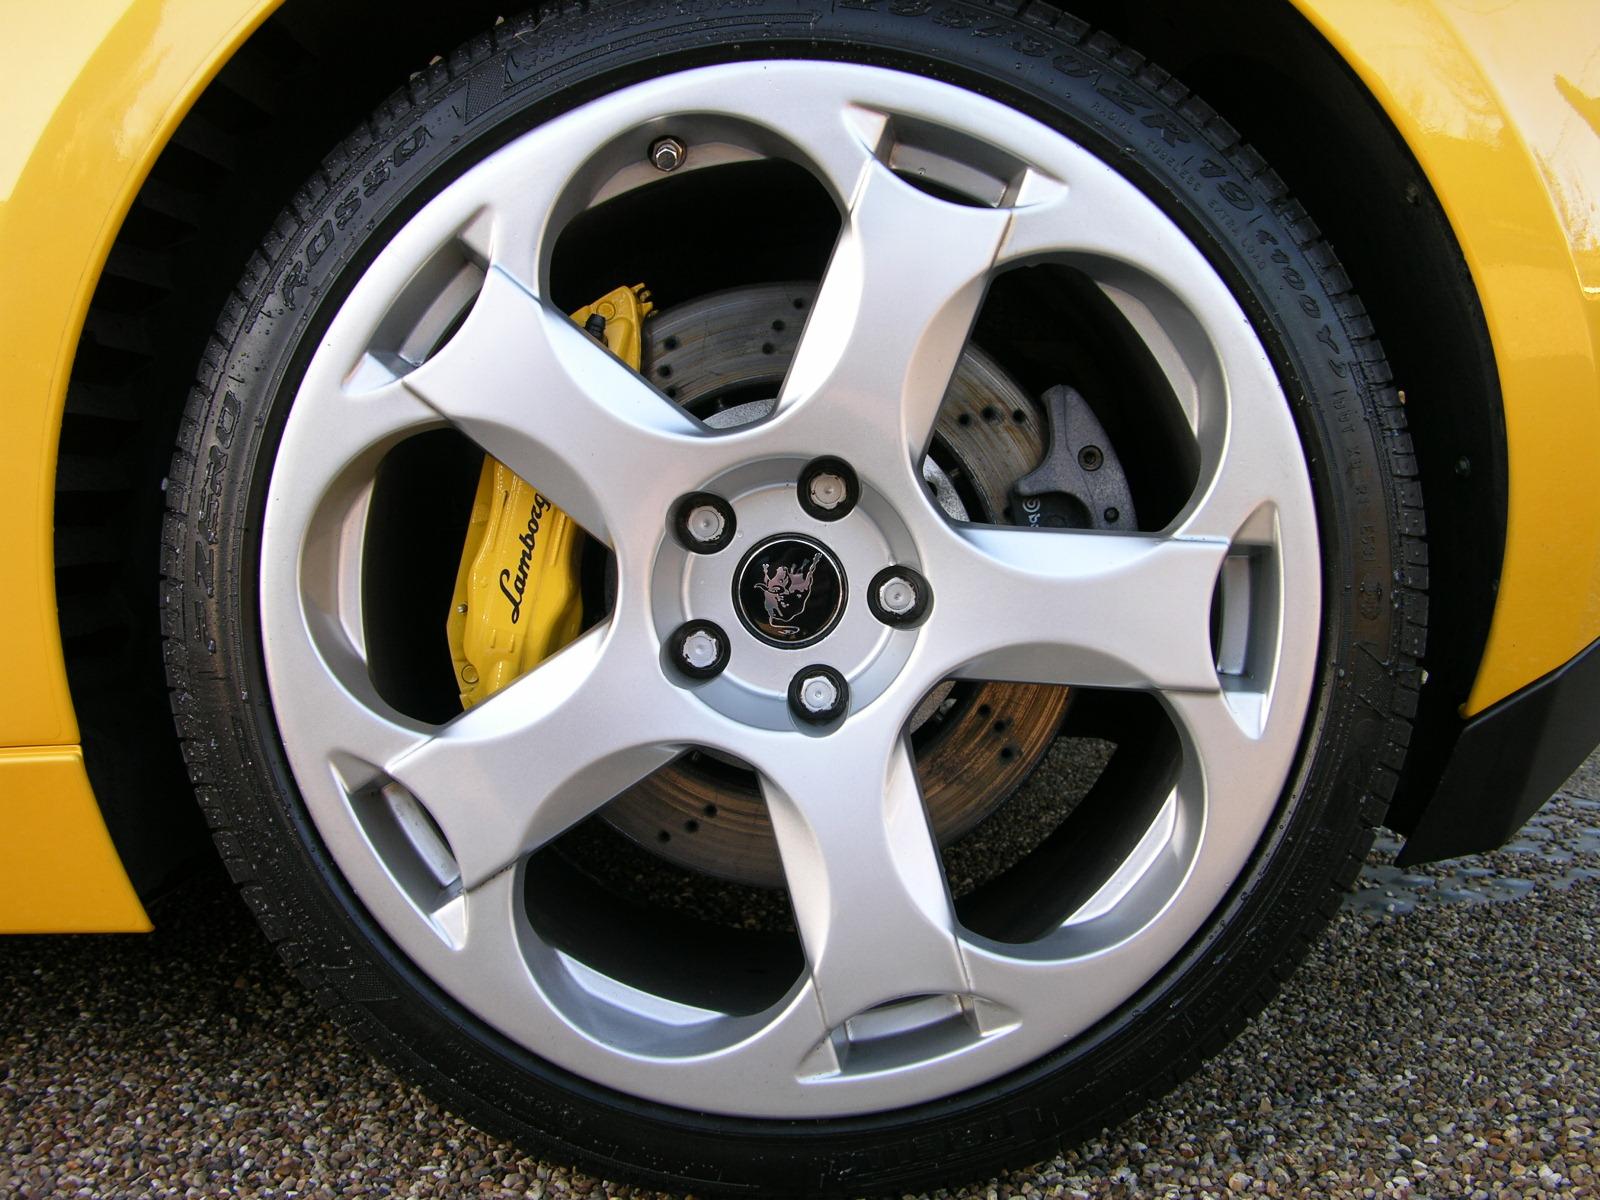 the wheels of the yellow car on the asphalt